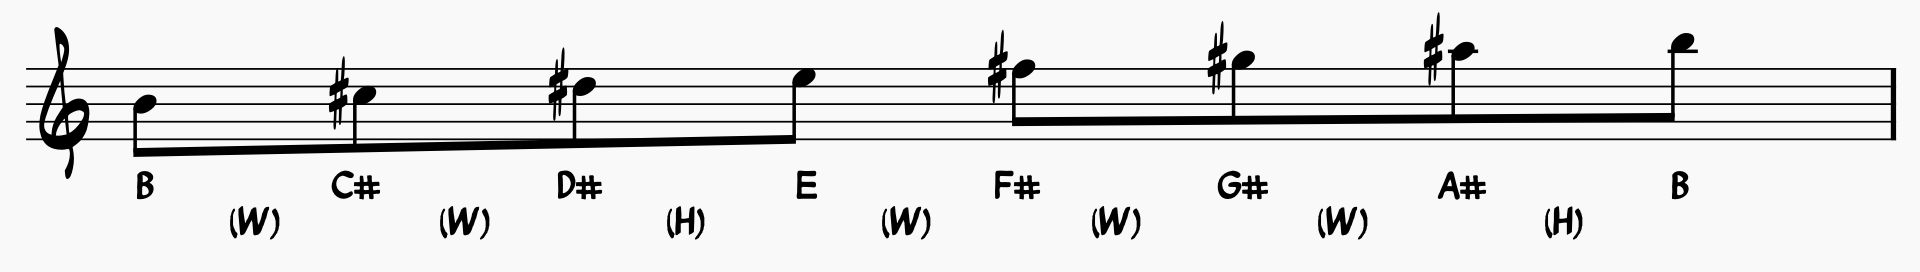 B Major Scale notated with whole steps and half steps